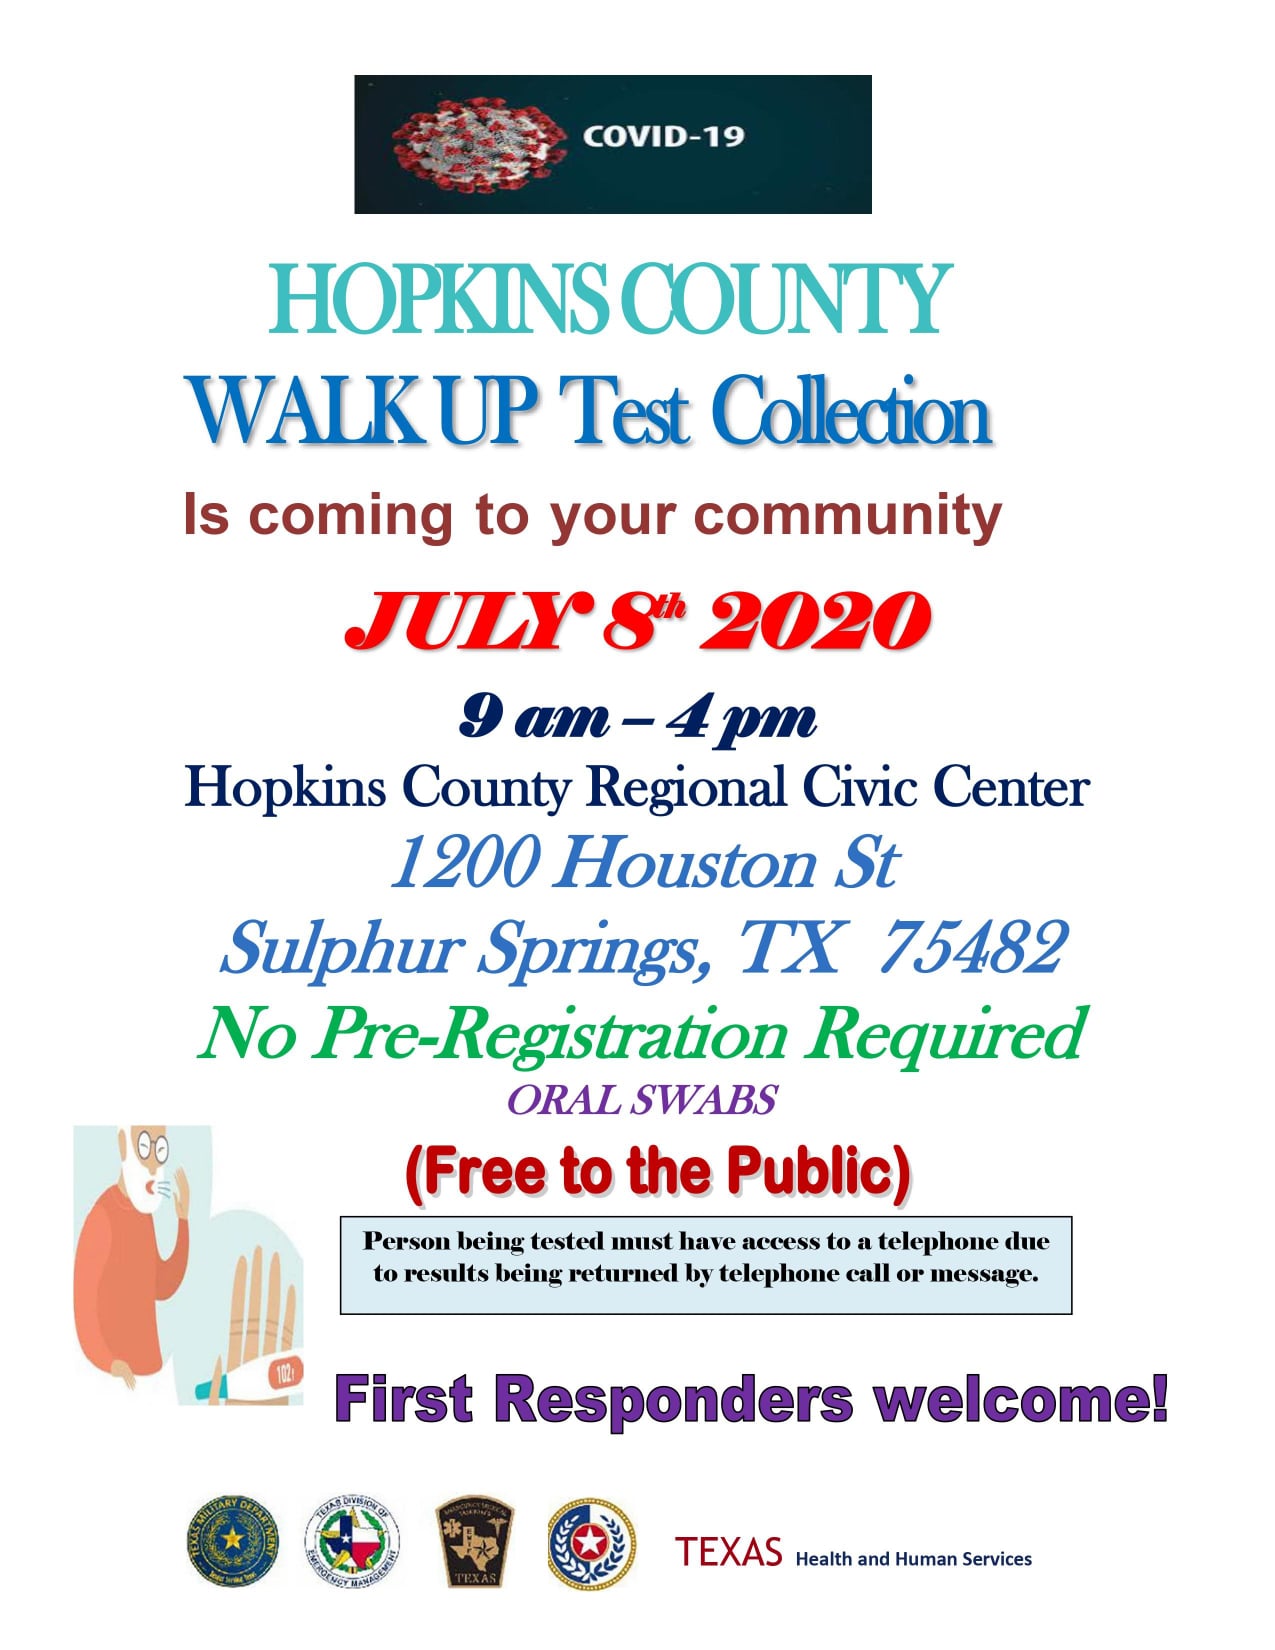 Free Walk-Up COVID-19 Testing Being Held at Civic Center on Wednesday